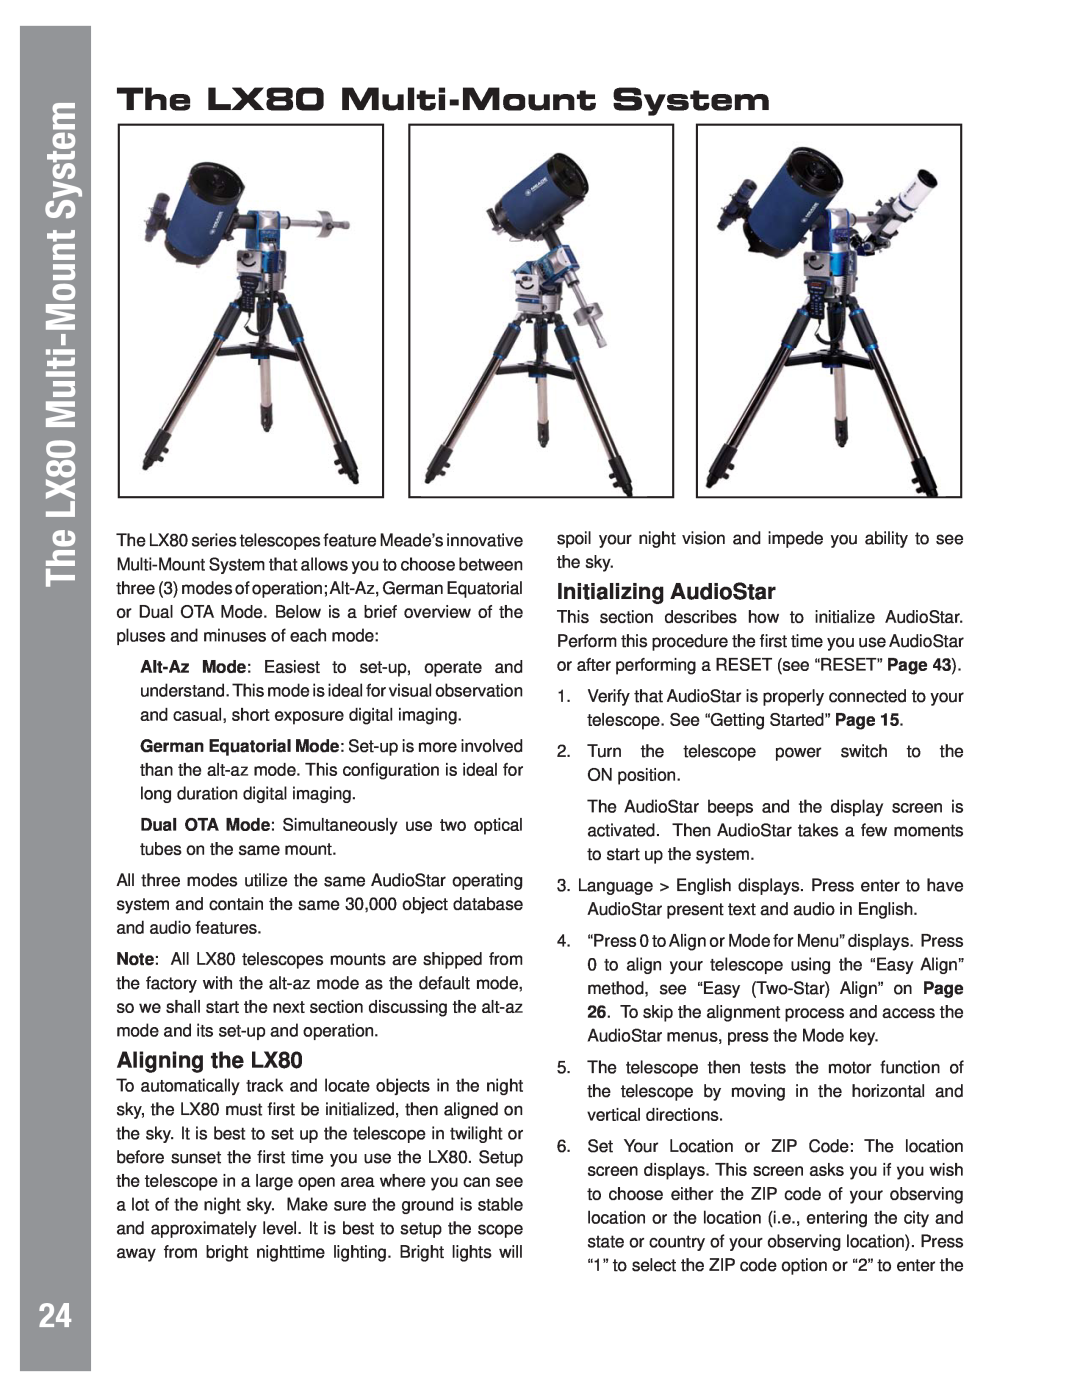 Meade instruction manual The LX80 Multi-Mount System, Initializing AudioStar, Aligning the LX80 